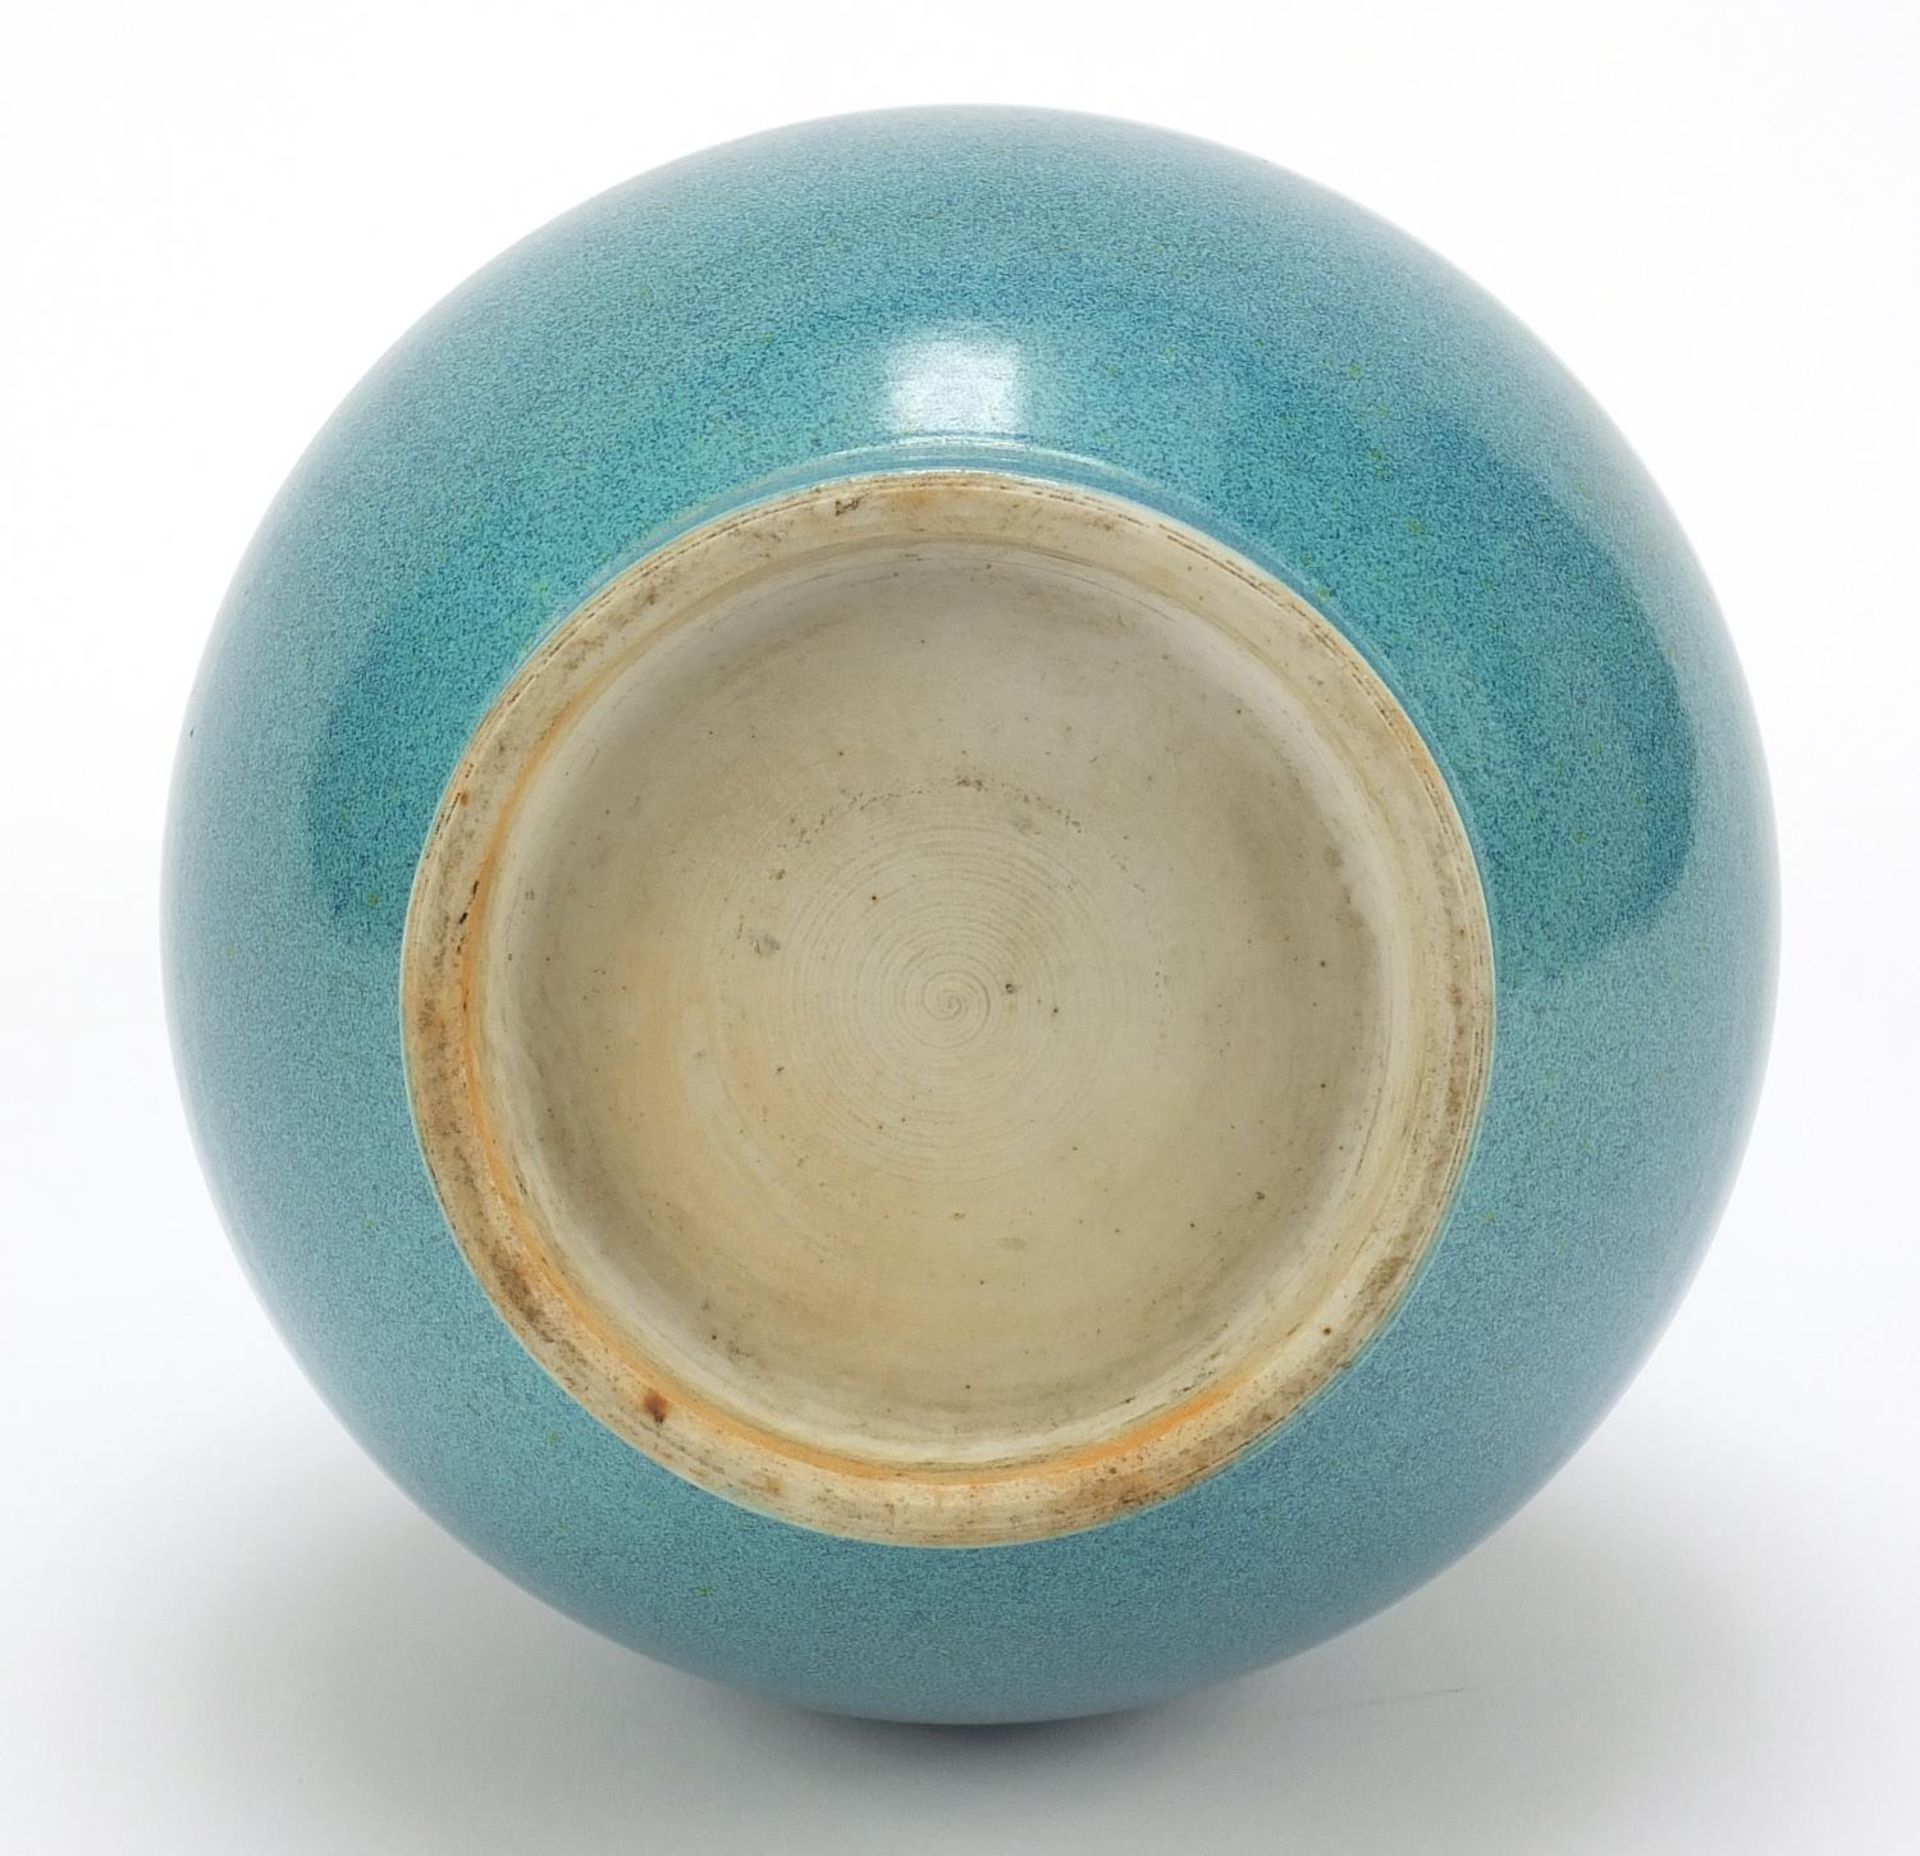 Chinese porcelain double gourd vase having a spotted turquoise glaze, 25.5cm high - Image 6 of 7